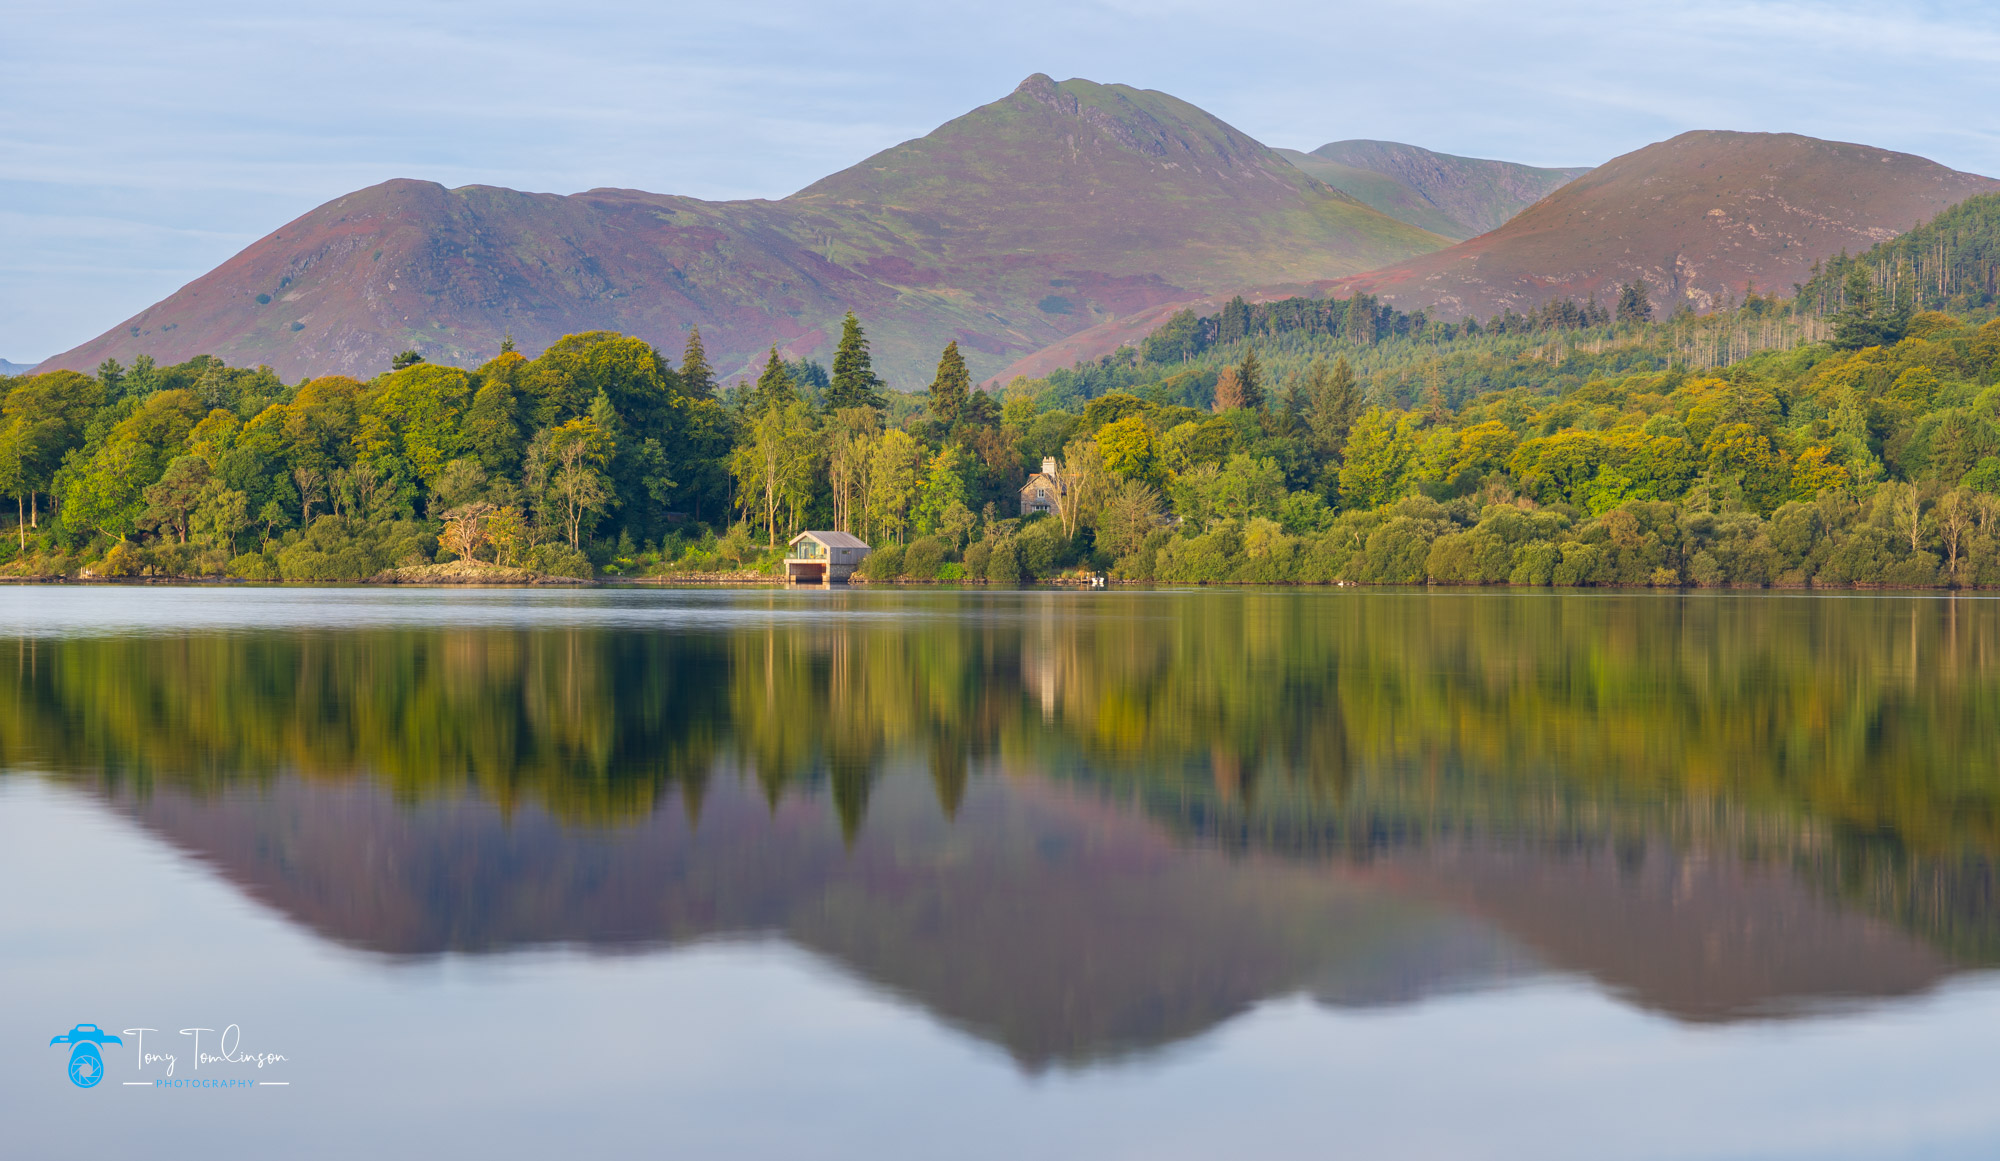 A view looking over Derwentwater towards the Cumbrian Fells.